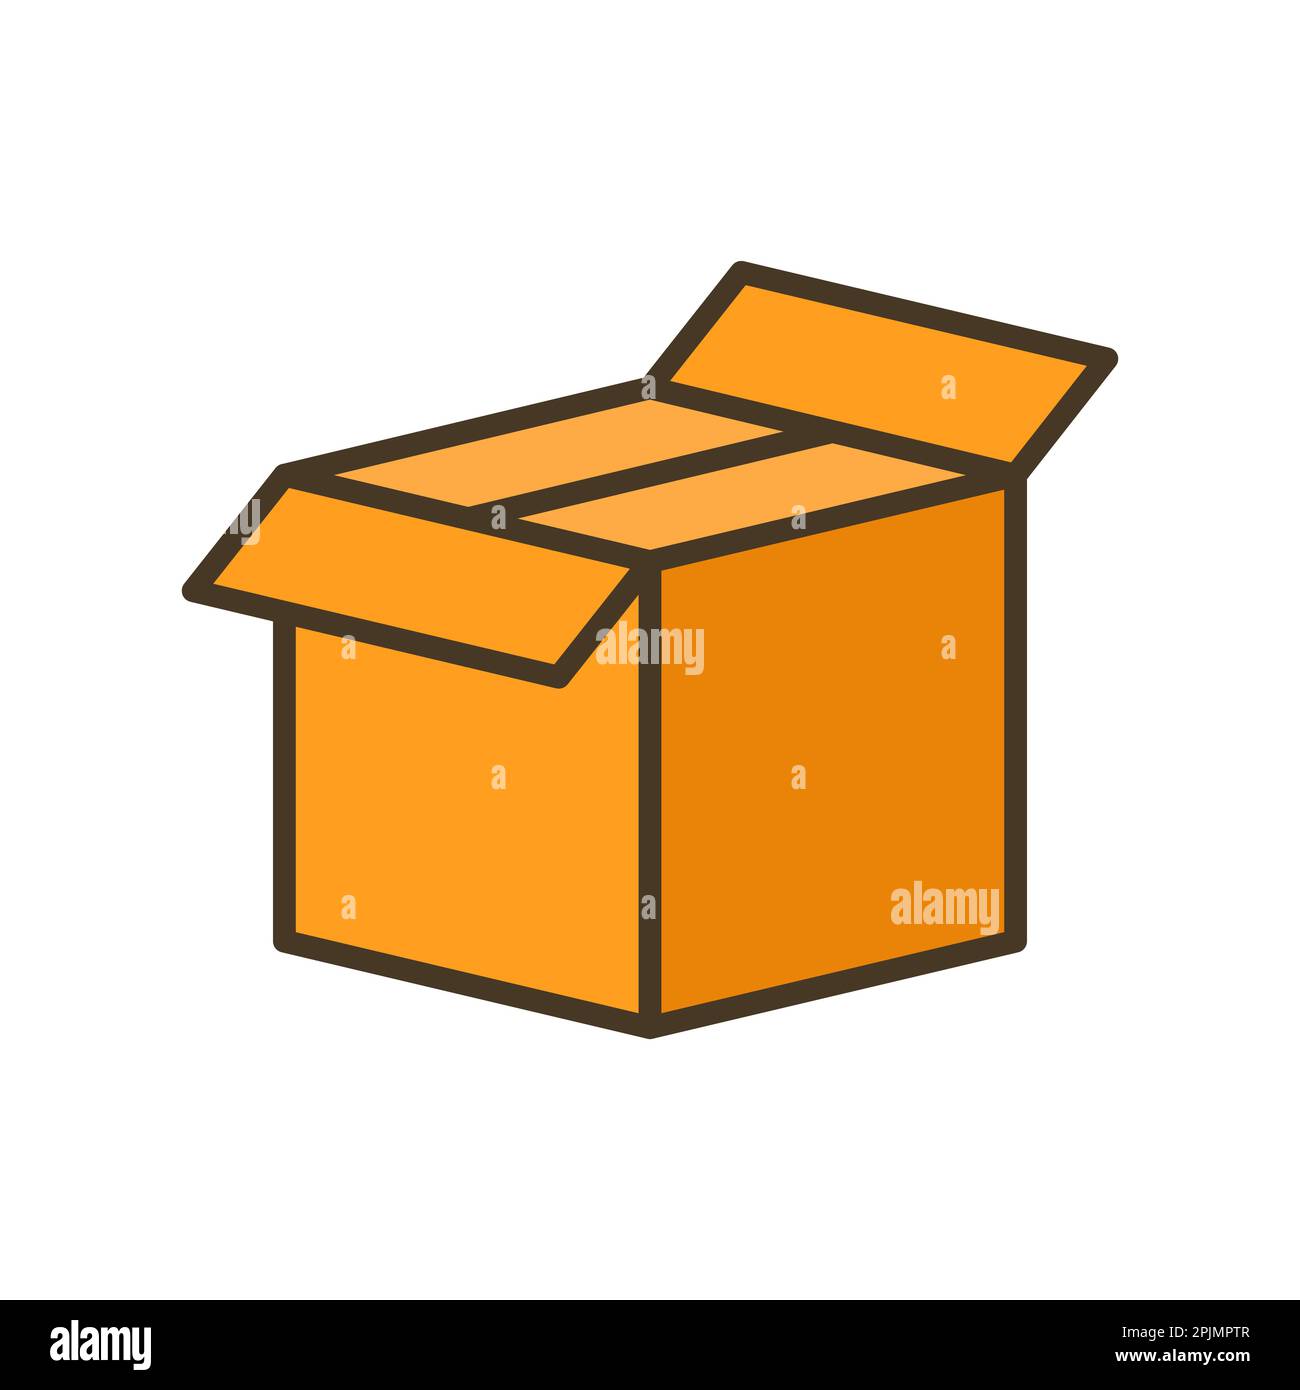 Shipping, delivery, package box or container icon. Cargo container symbol. Open boxes. Applicable for post, delivery, gift illustration. Vector illust Stock Vector